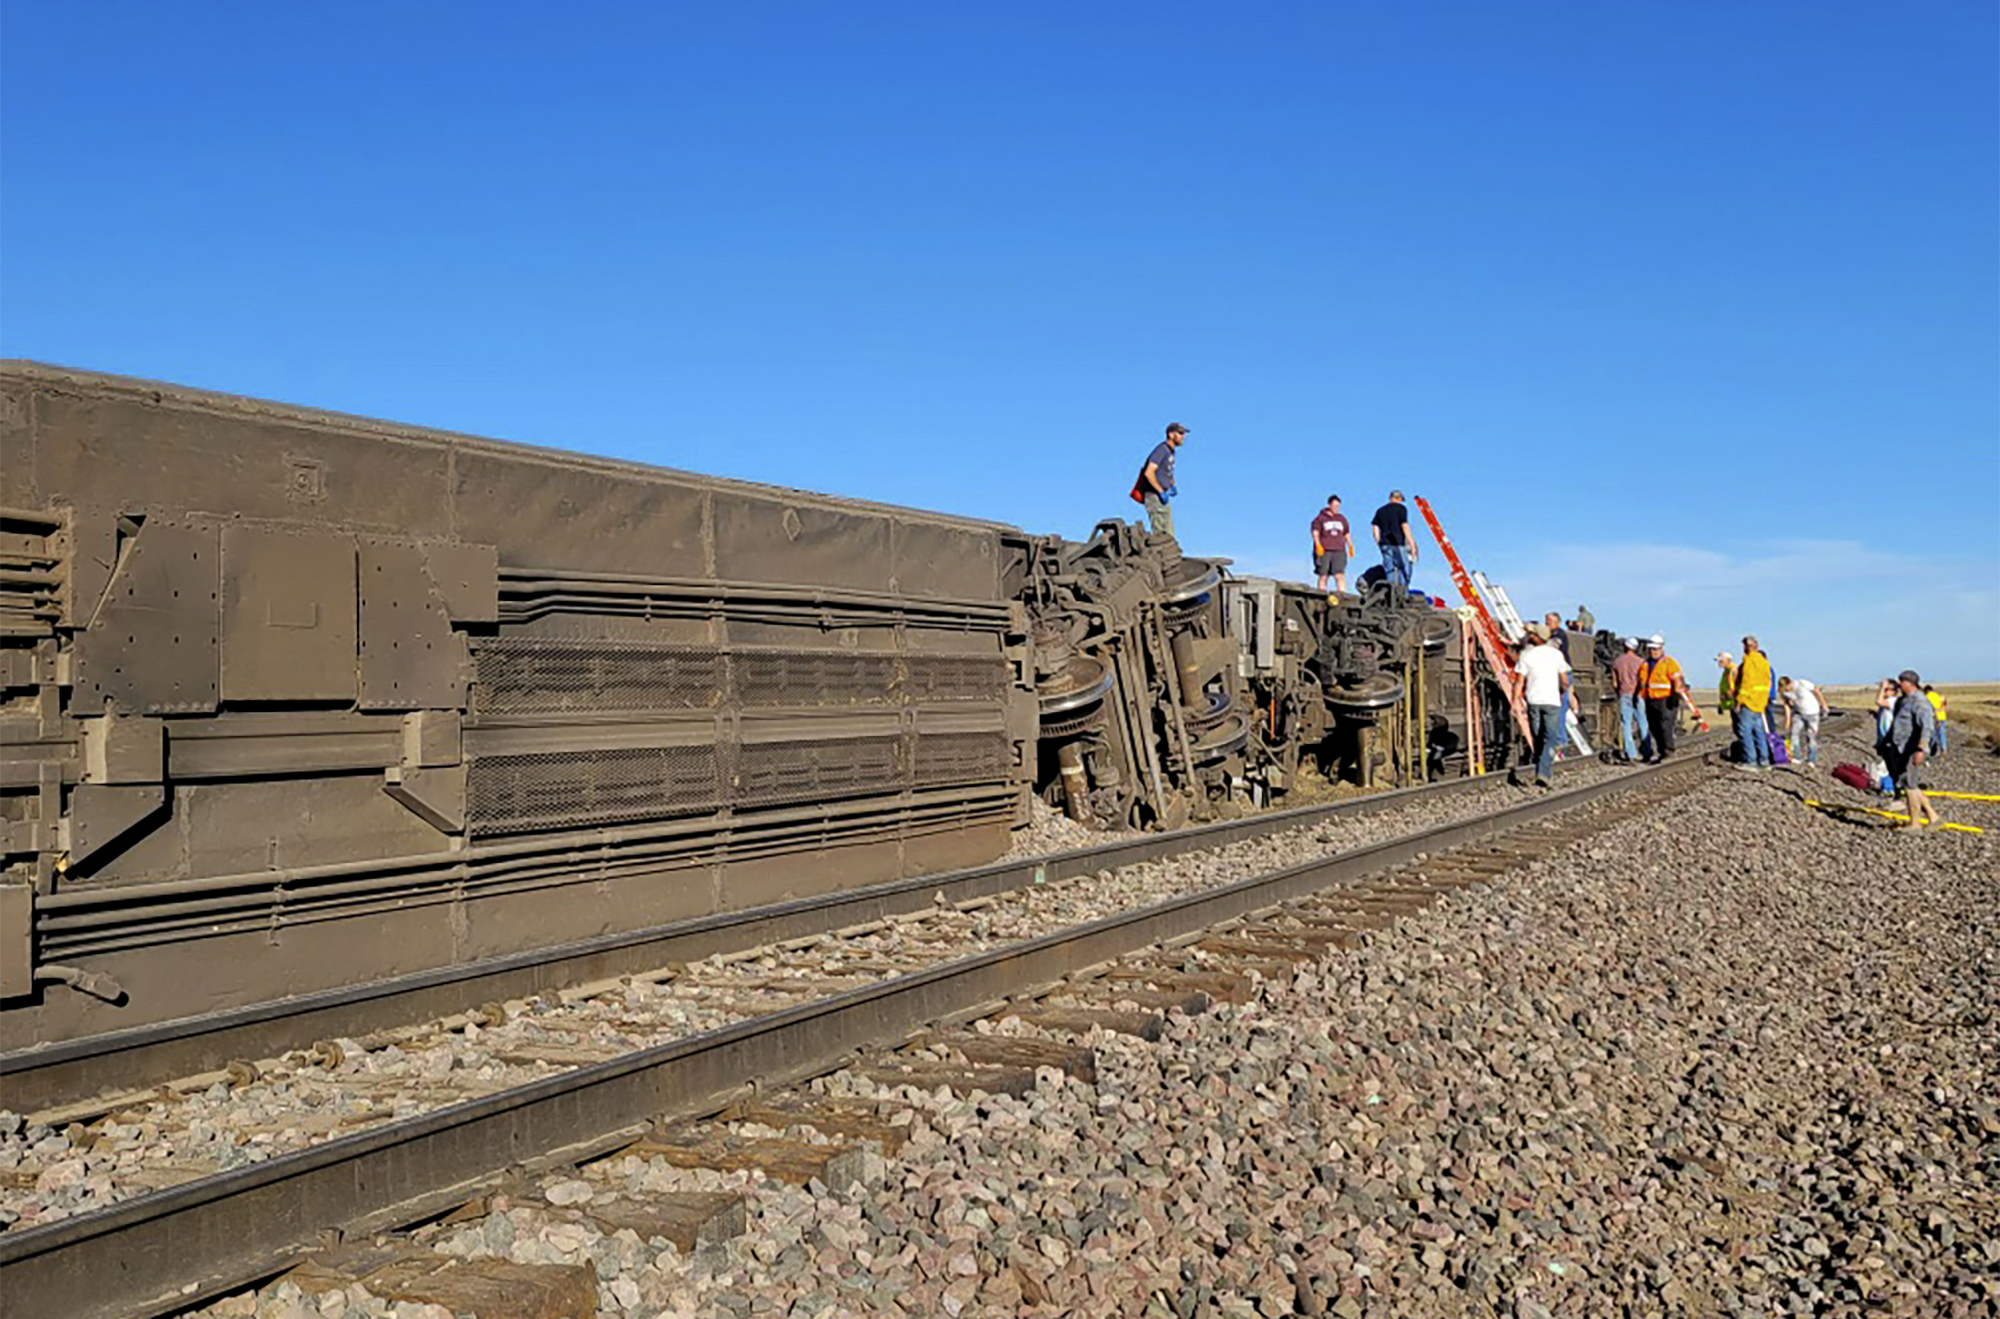 People at the scene of the derailment